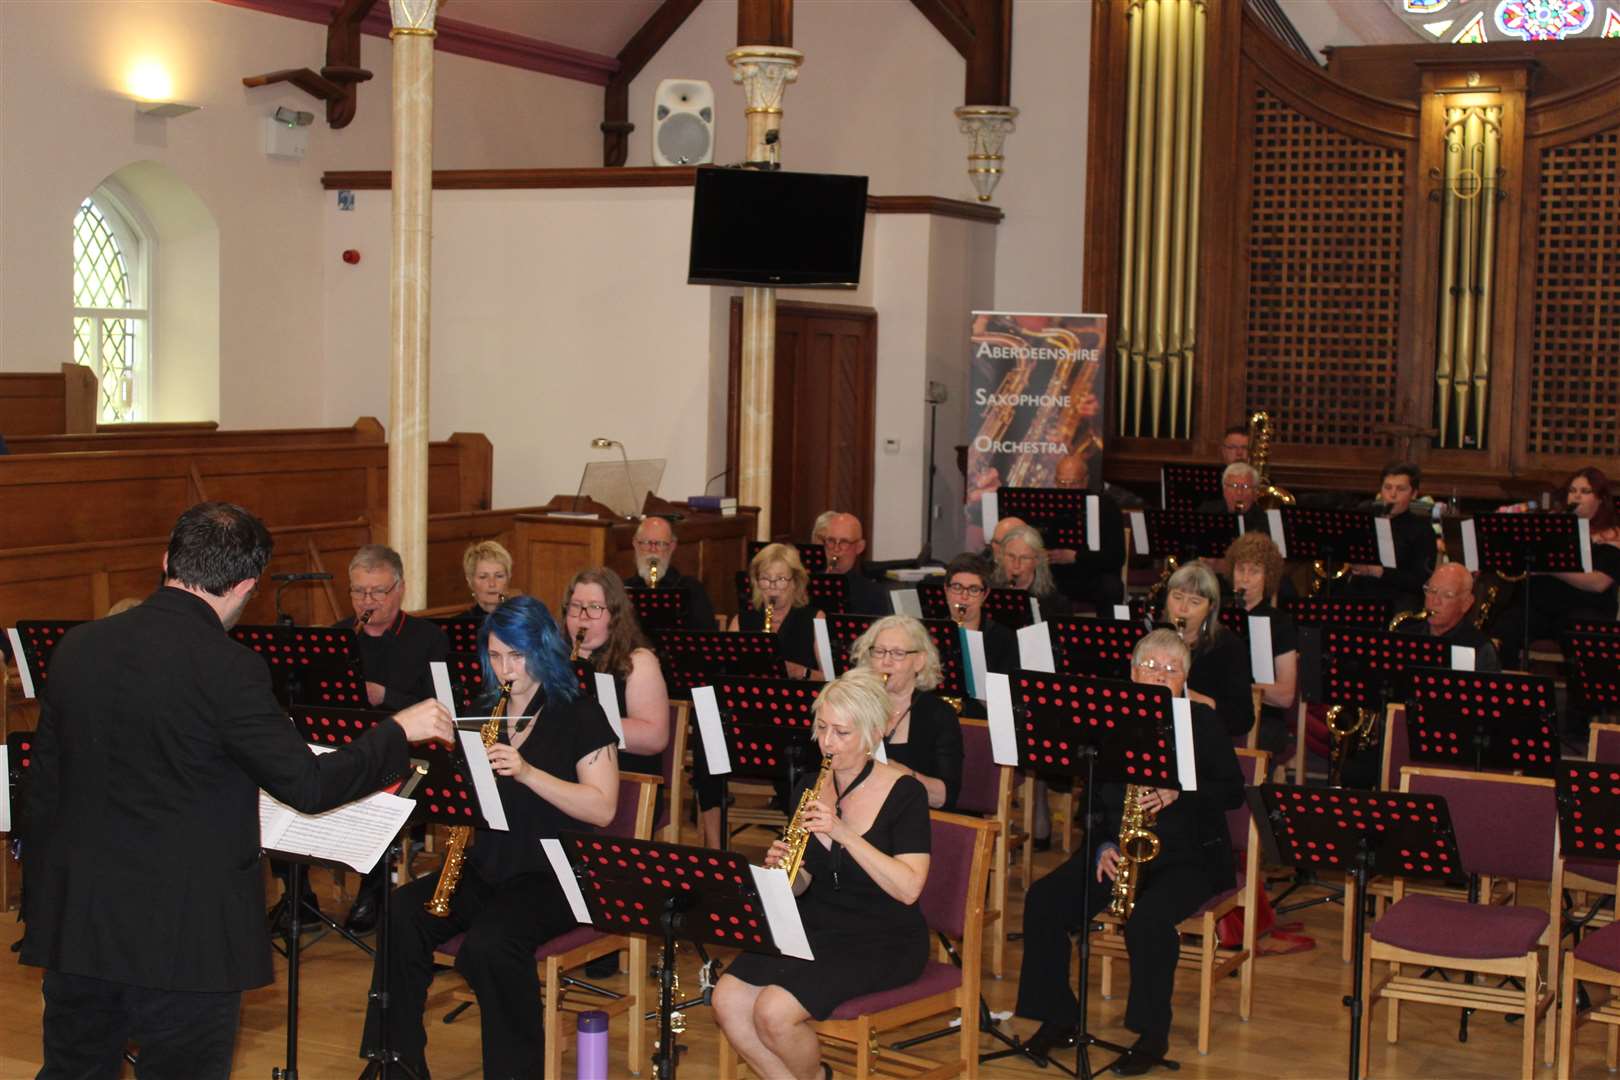 Members of the saxophone orchestras getting ready for their concert in the Acorn centre, West High Street, Inverurie on Saturday night. Picture: Griselda McGregor